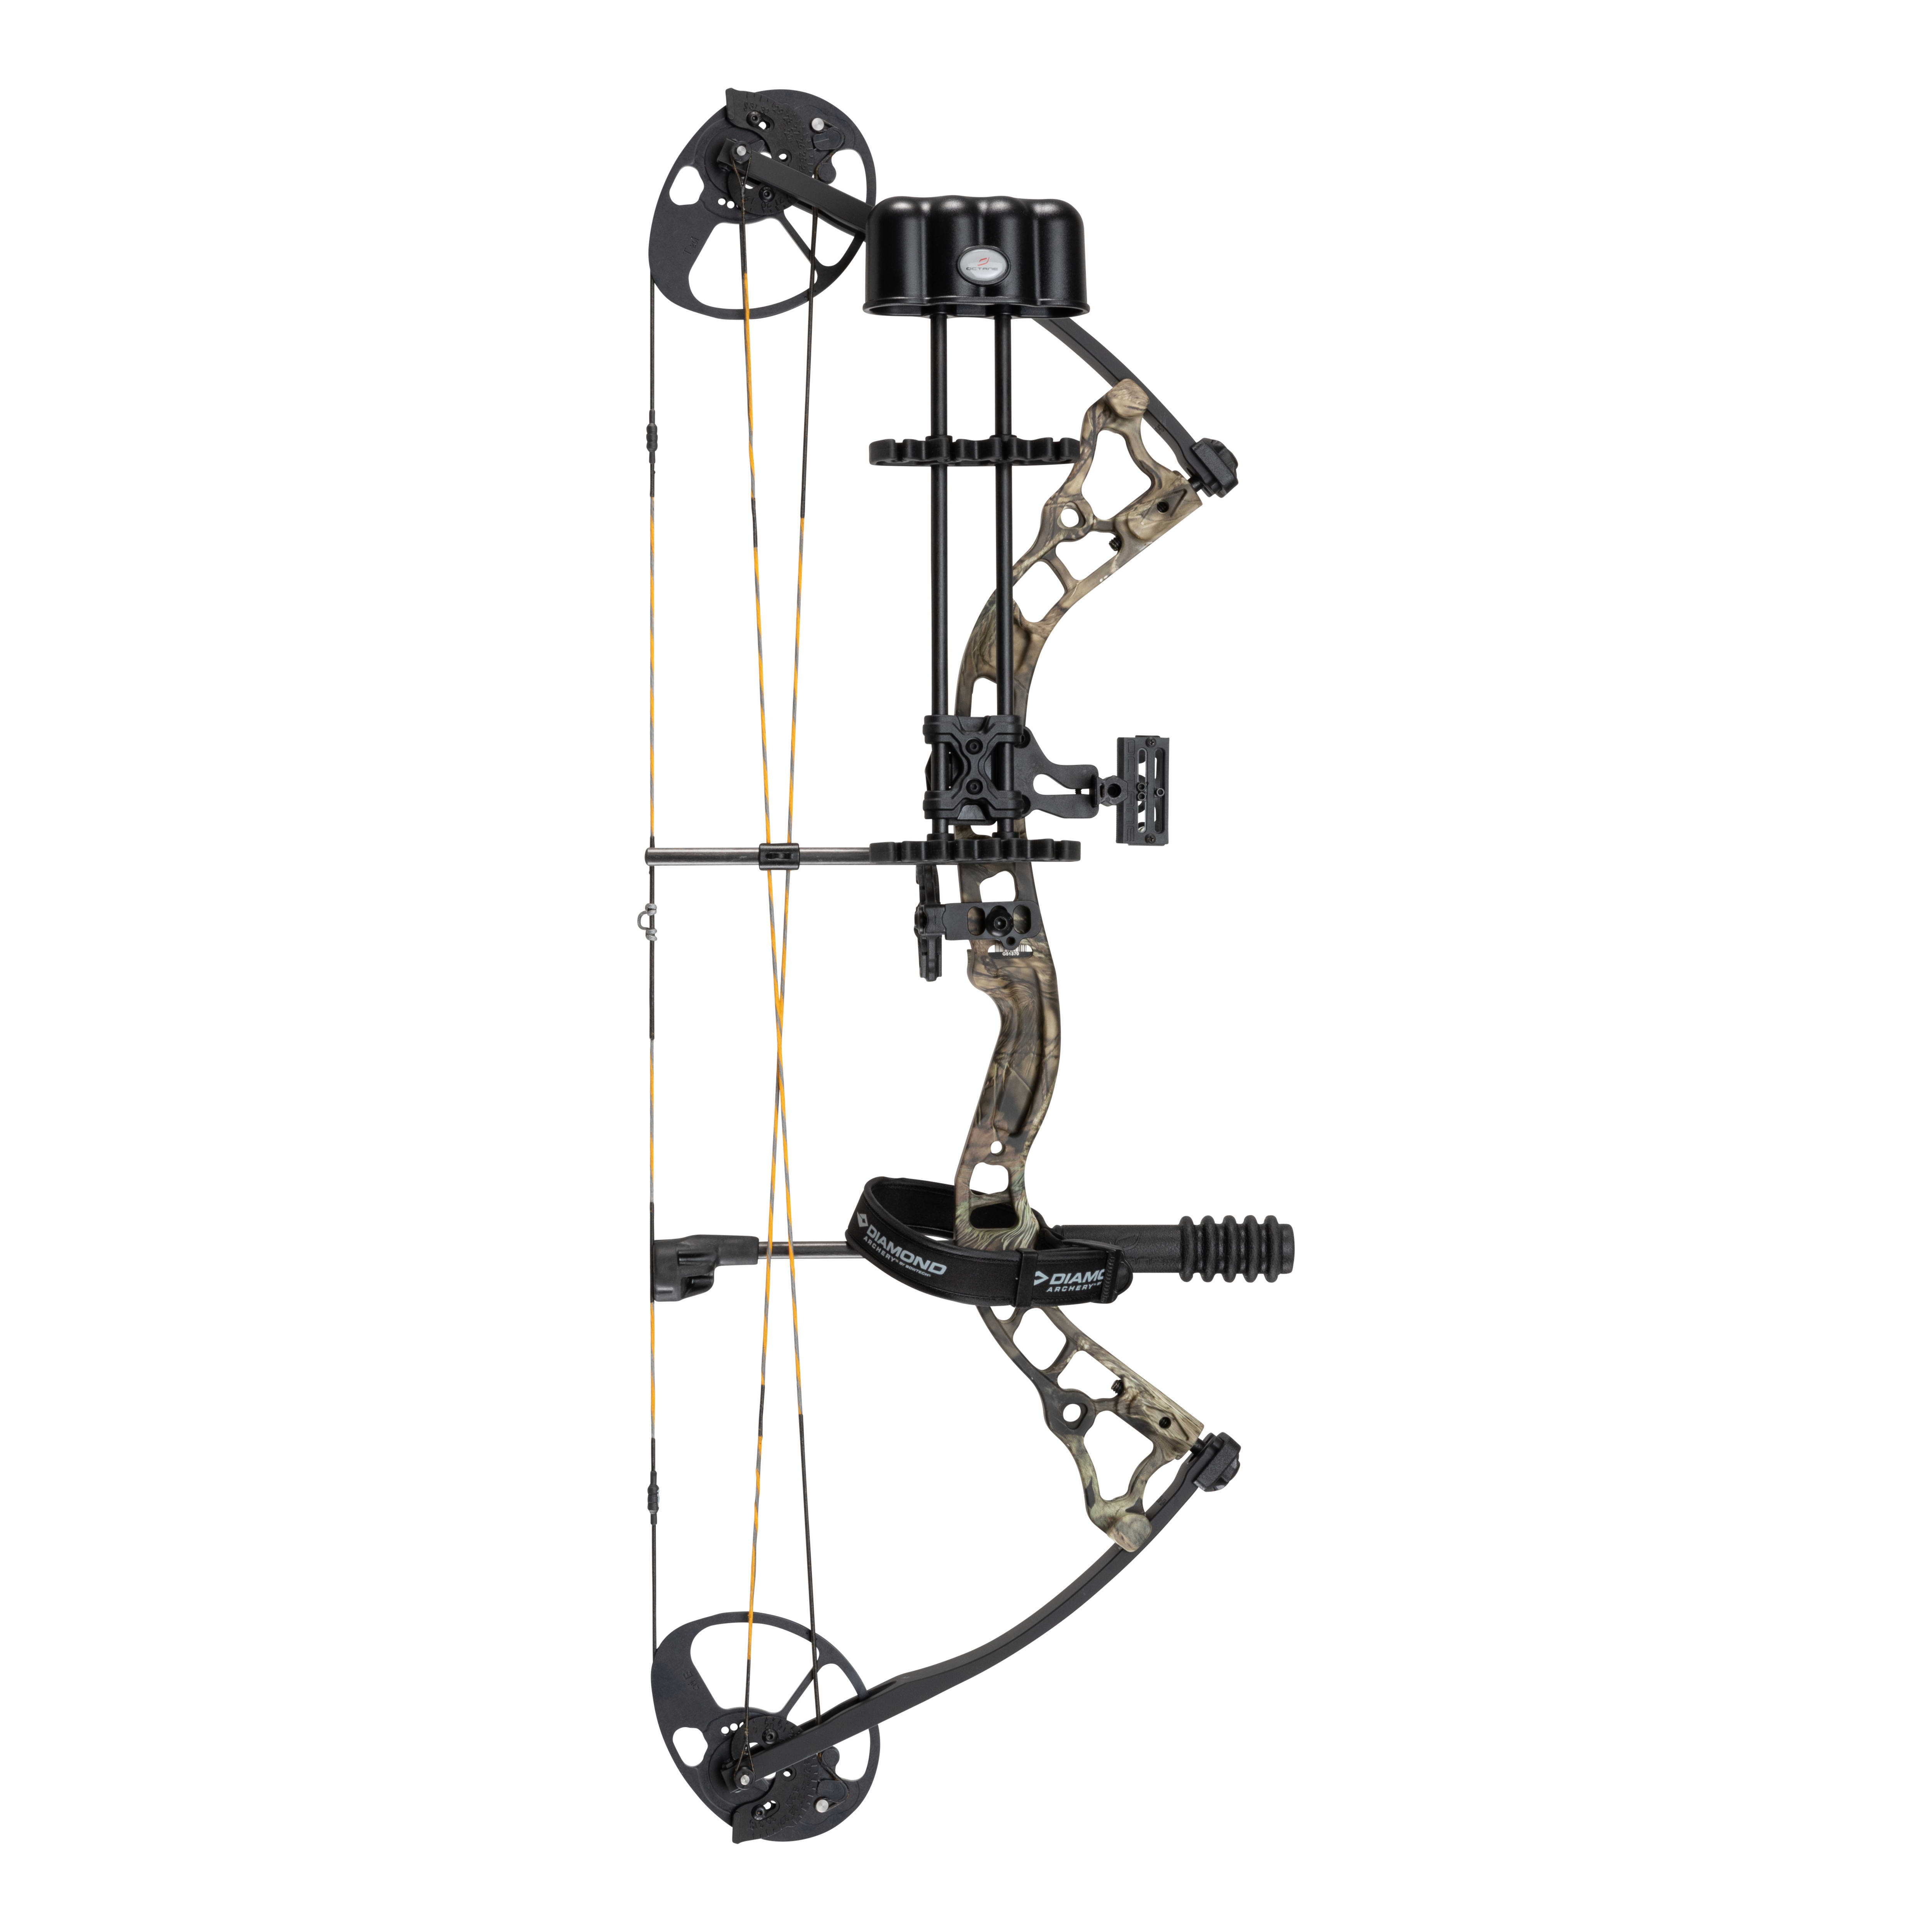 Diamond Infinite 305 Compound Bow Package - Mossy Oak Break-Up Country - Right